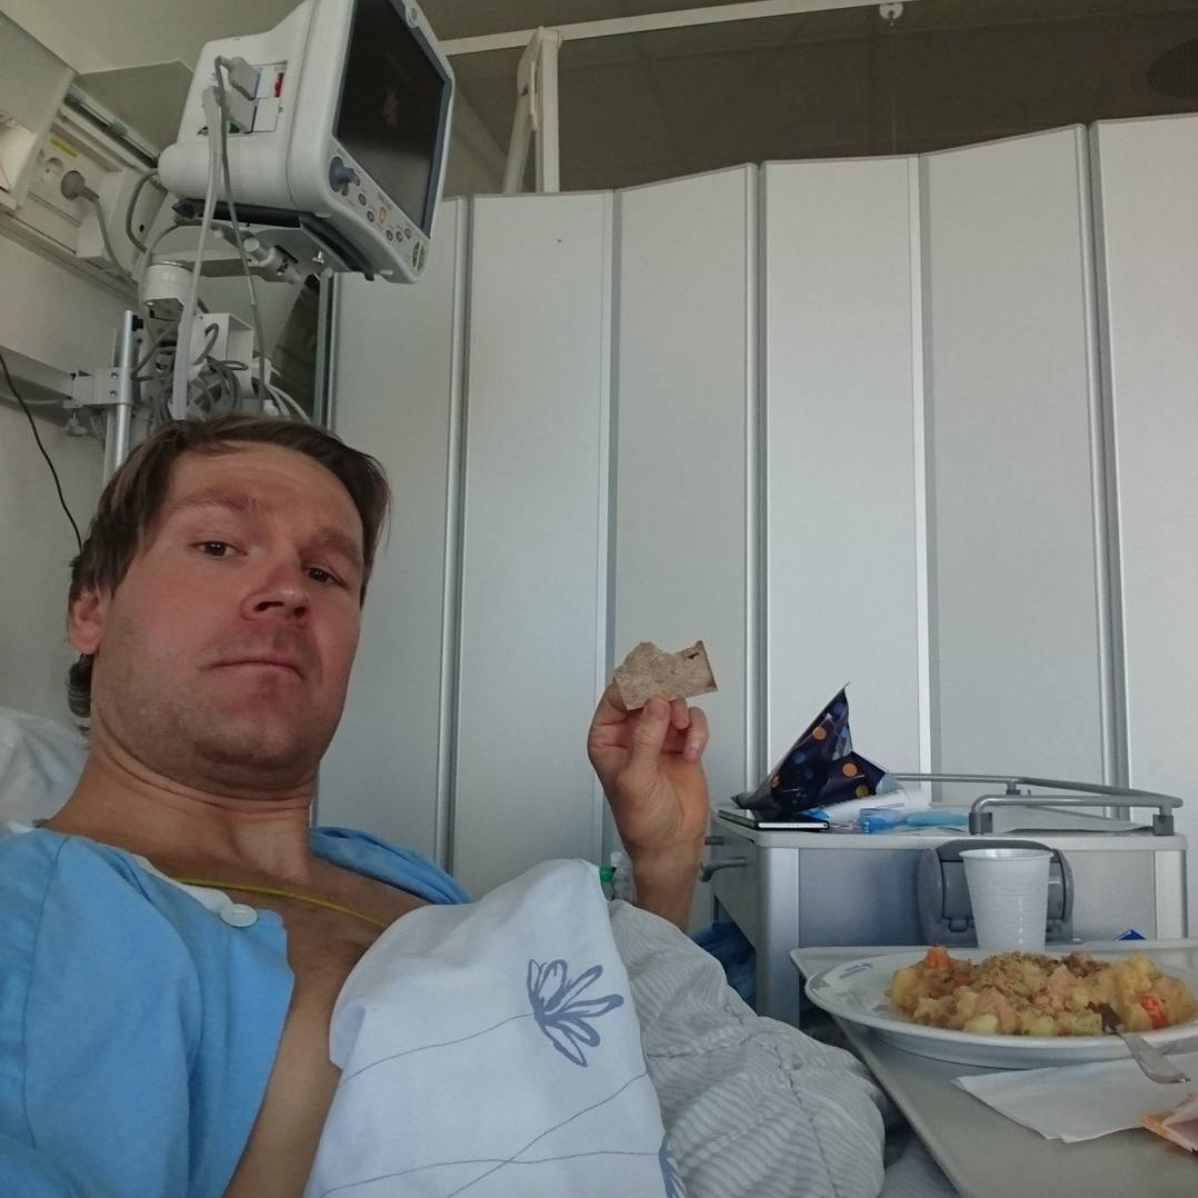 Norwegian sprinter-turned-distance skier Øystein Pettersen Instagramed a photo of himself in the Ahus hospital in Norway on Monday, showing his highlight of the day: stew and flatbread. (Photo: Øystein Pettersen/Instagram)